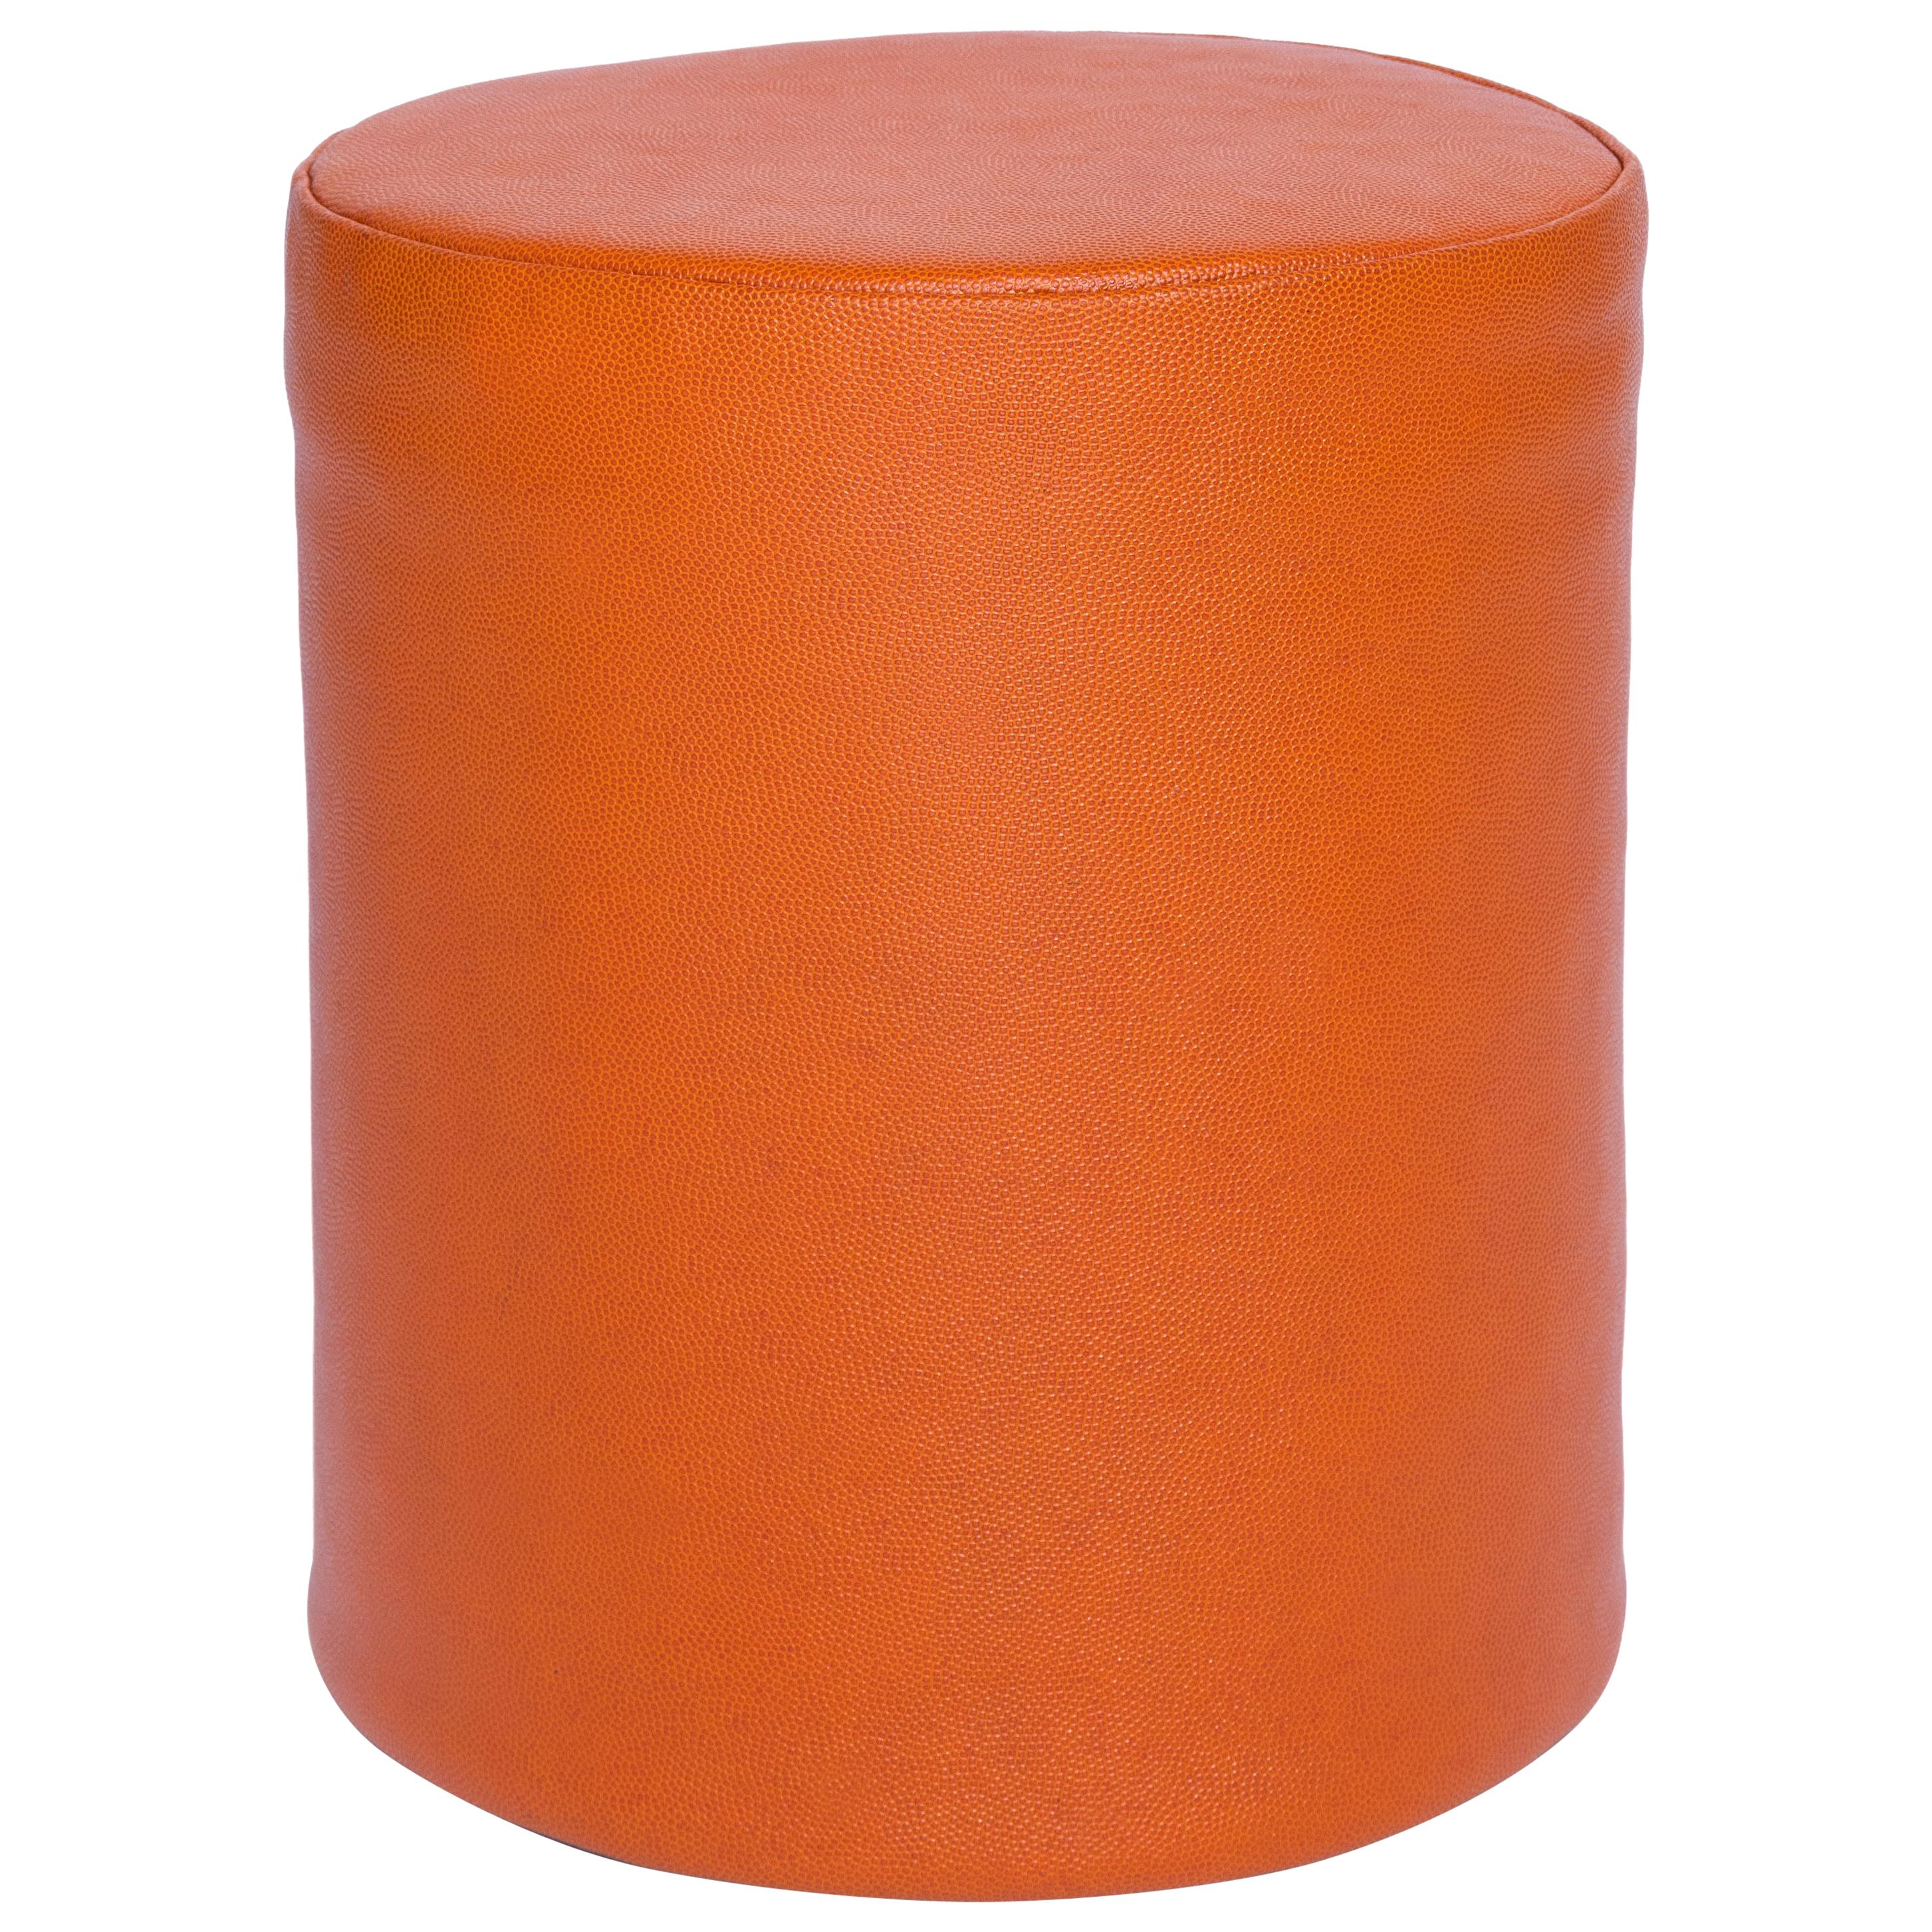 Orange Sport Pouf in Basketball Game-Ball Leather For Sale